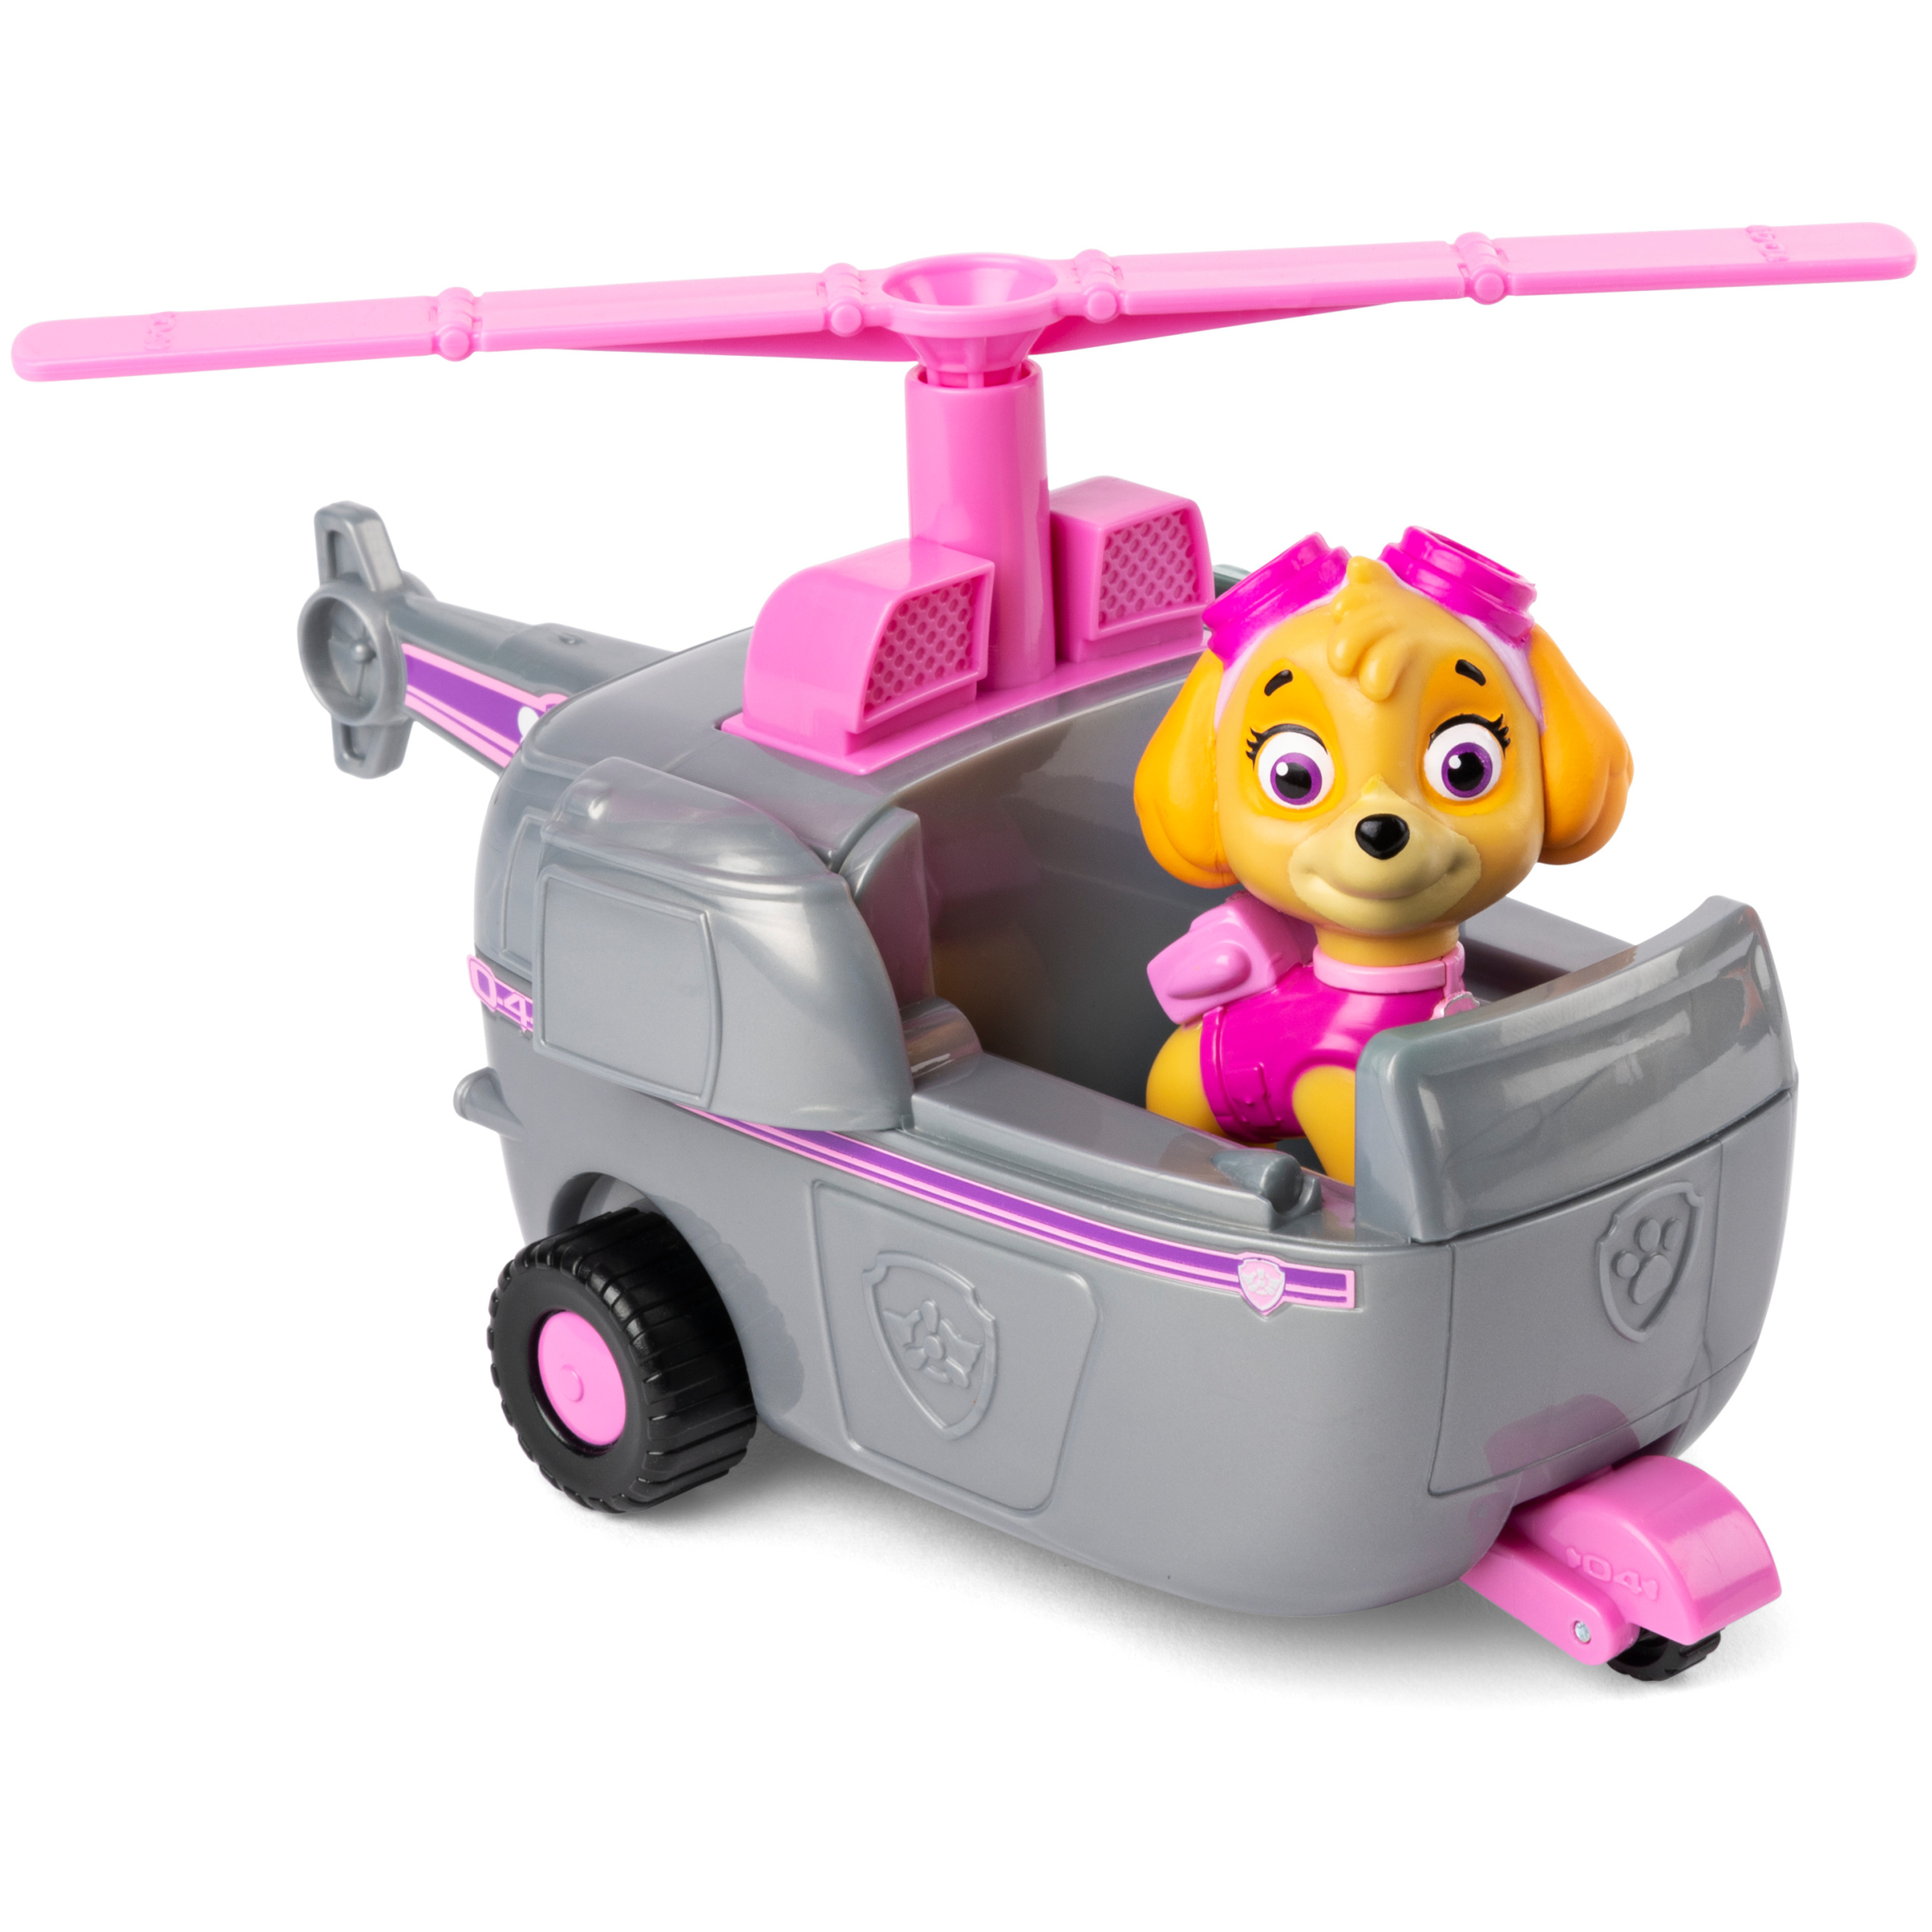 PAW Patrol, Skye’s Helicopter Vehicle with Collectible Figure, for Kids Aged 3 and Up - image 4 of 5